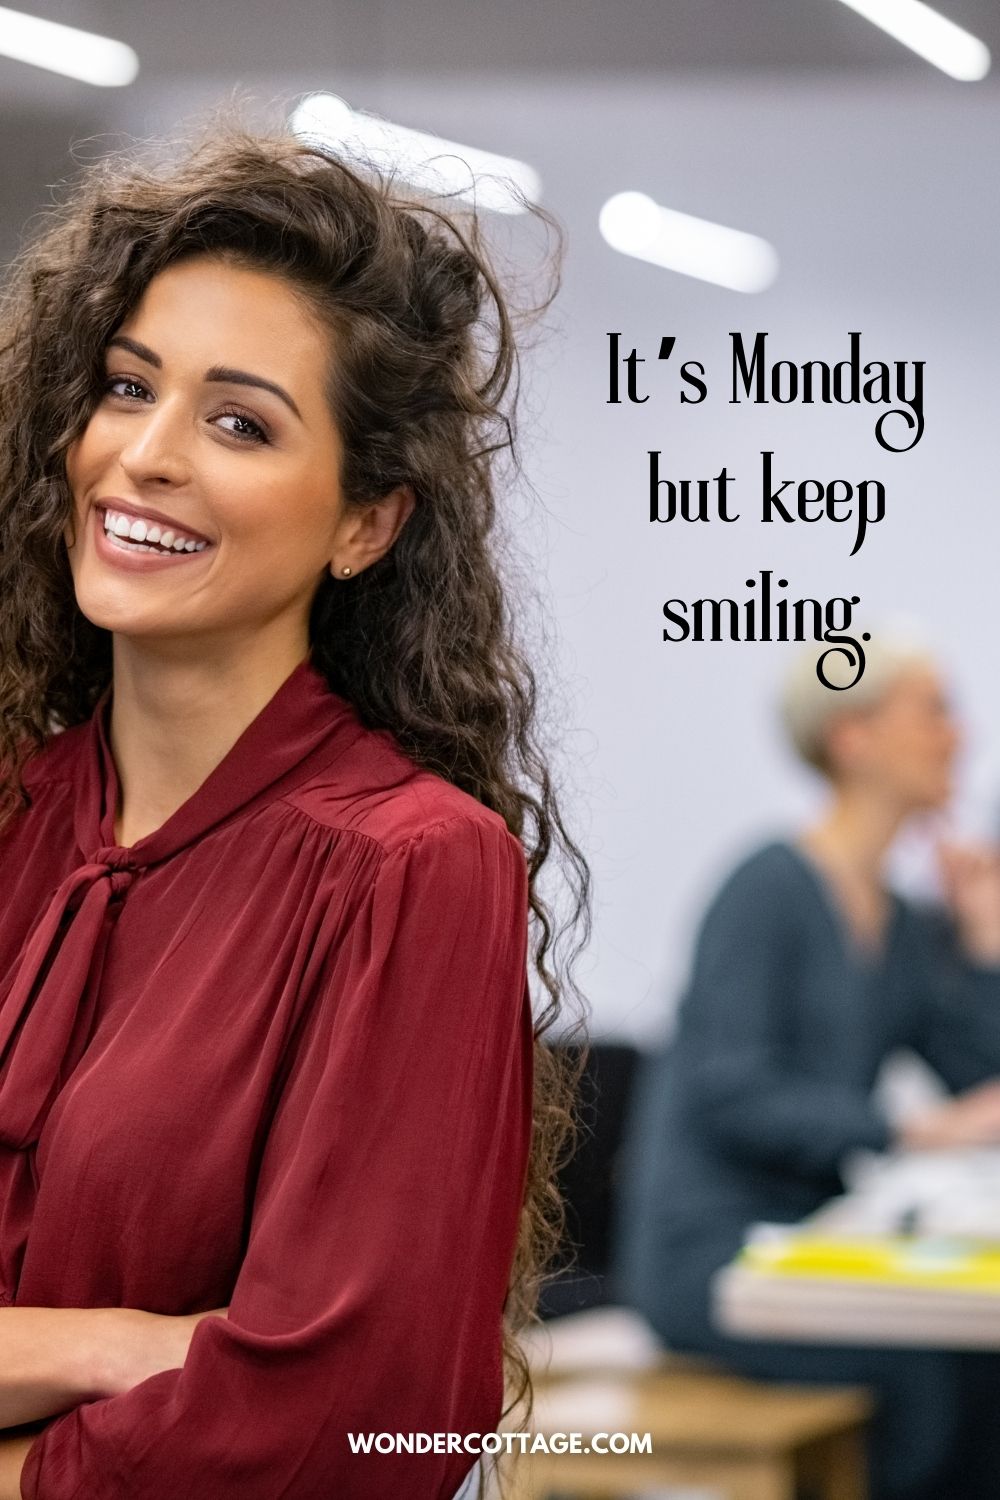 It’s Monday but keep smiling.